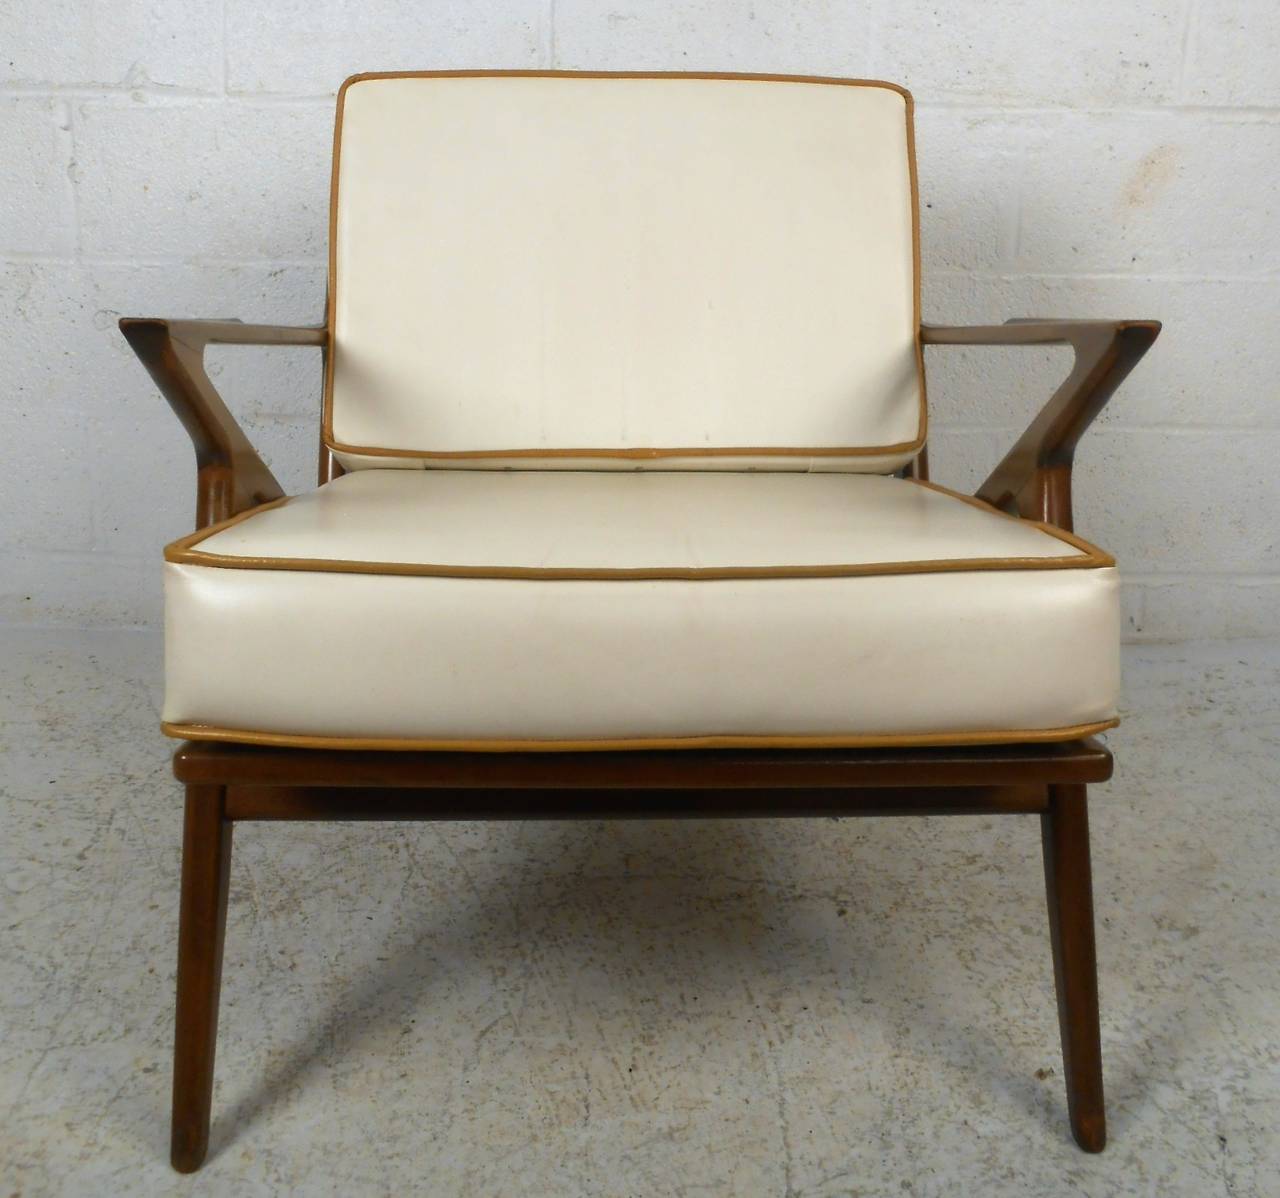 This stylish midcentury design combines comfort and style in an arm chair perfect for lounging. Sculpted Z frame design complimented by vintage vinyl upholstery make for a great addition to any room. Please confirm item location (NY or NJ).